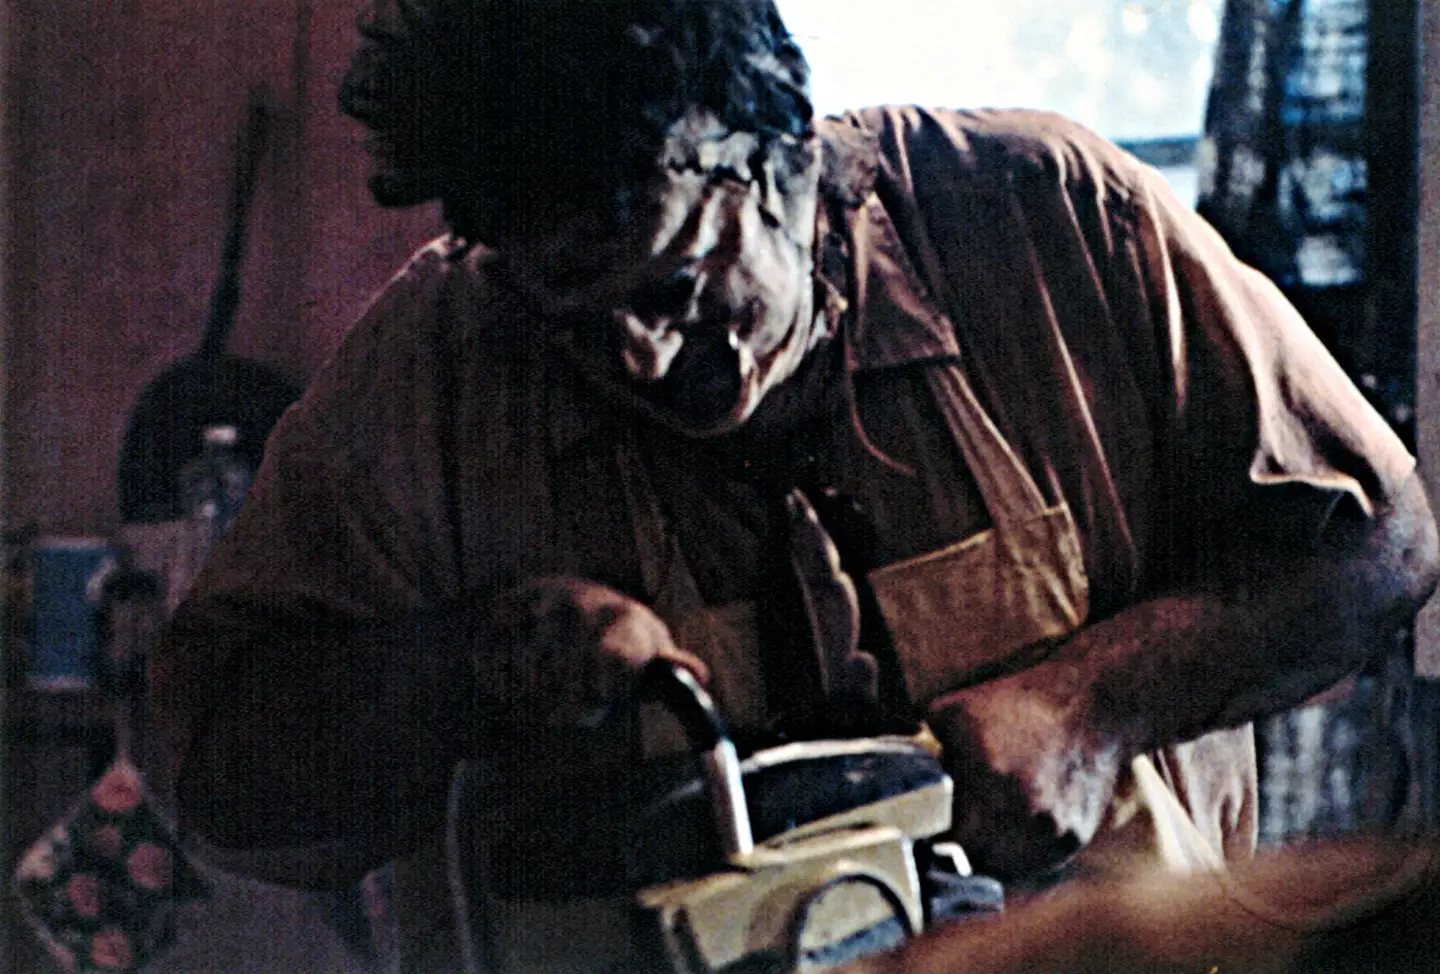 Quentin Tarantino said The Texas Chainsaw Massacre was one of his 'perfect' movies.